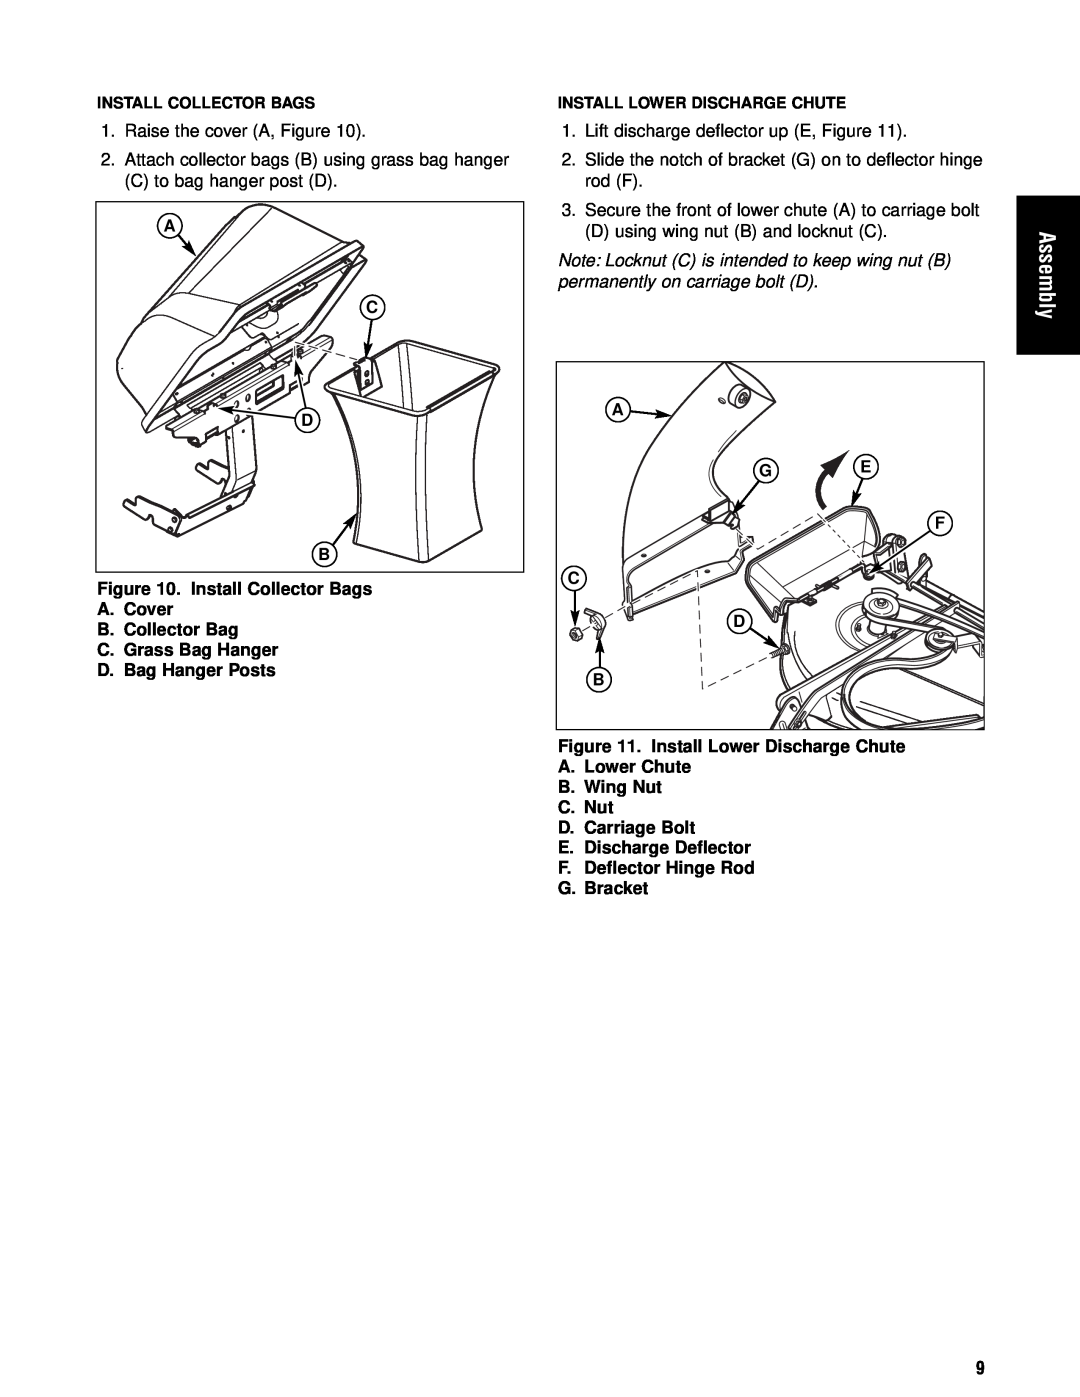 Briggs & Stratton 1695353 manual Assembly, Raise the cover A, Figure 